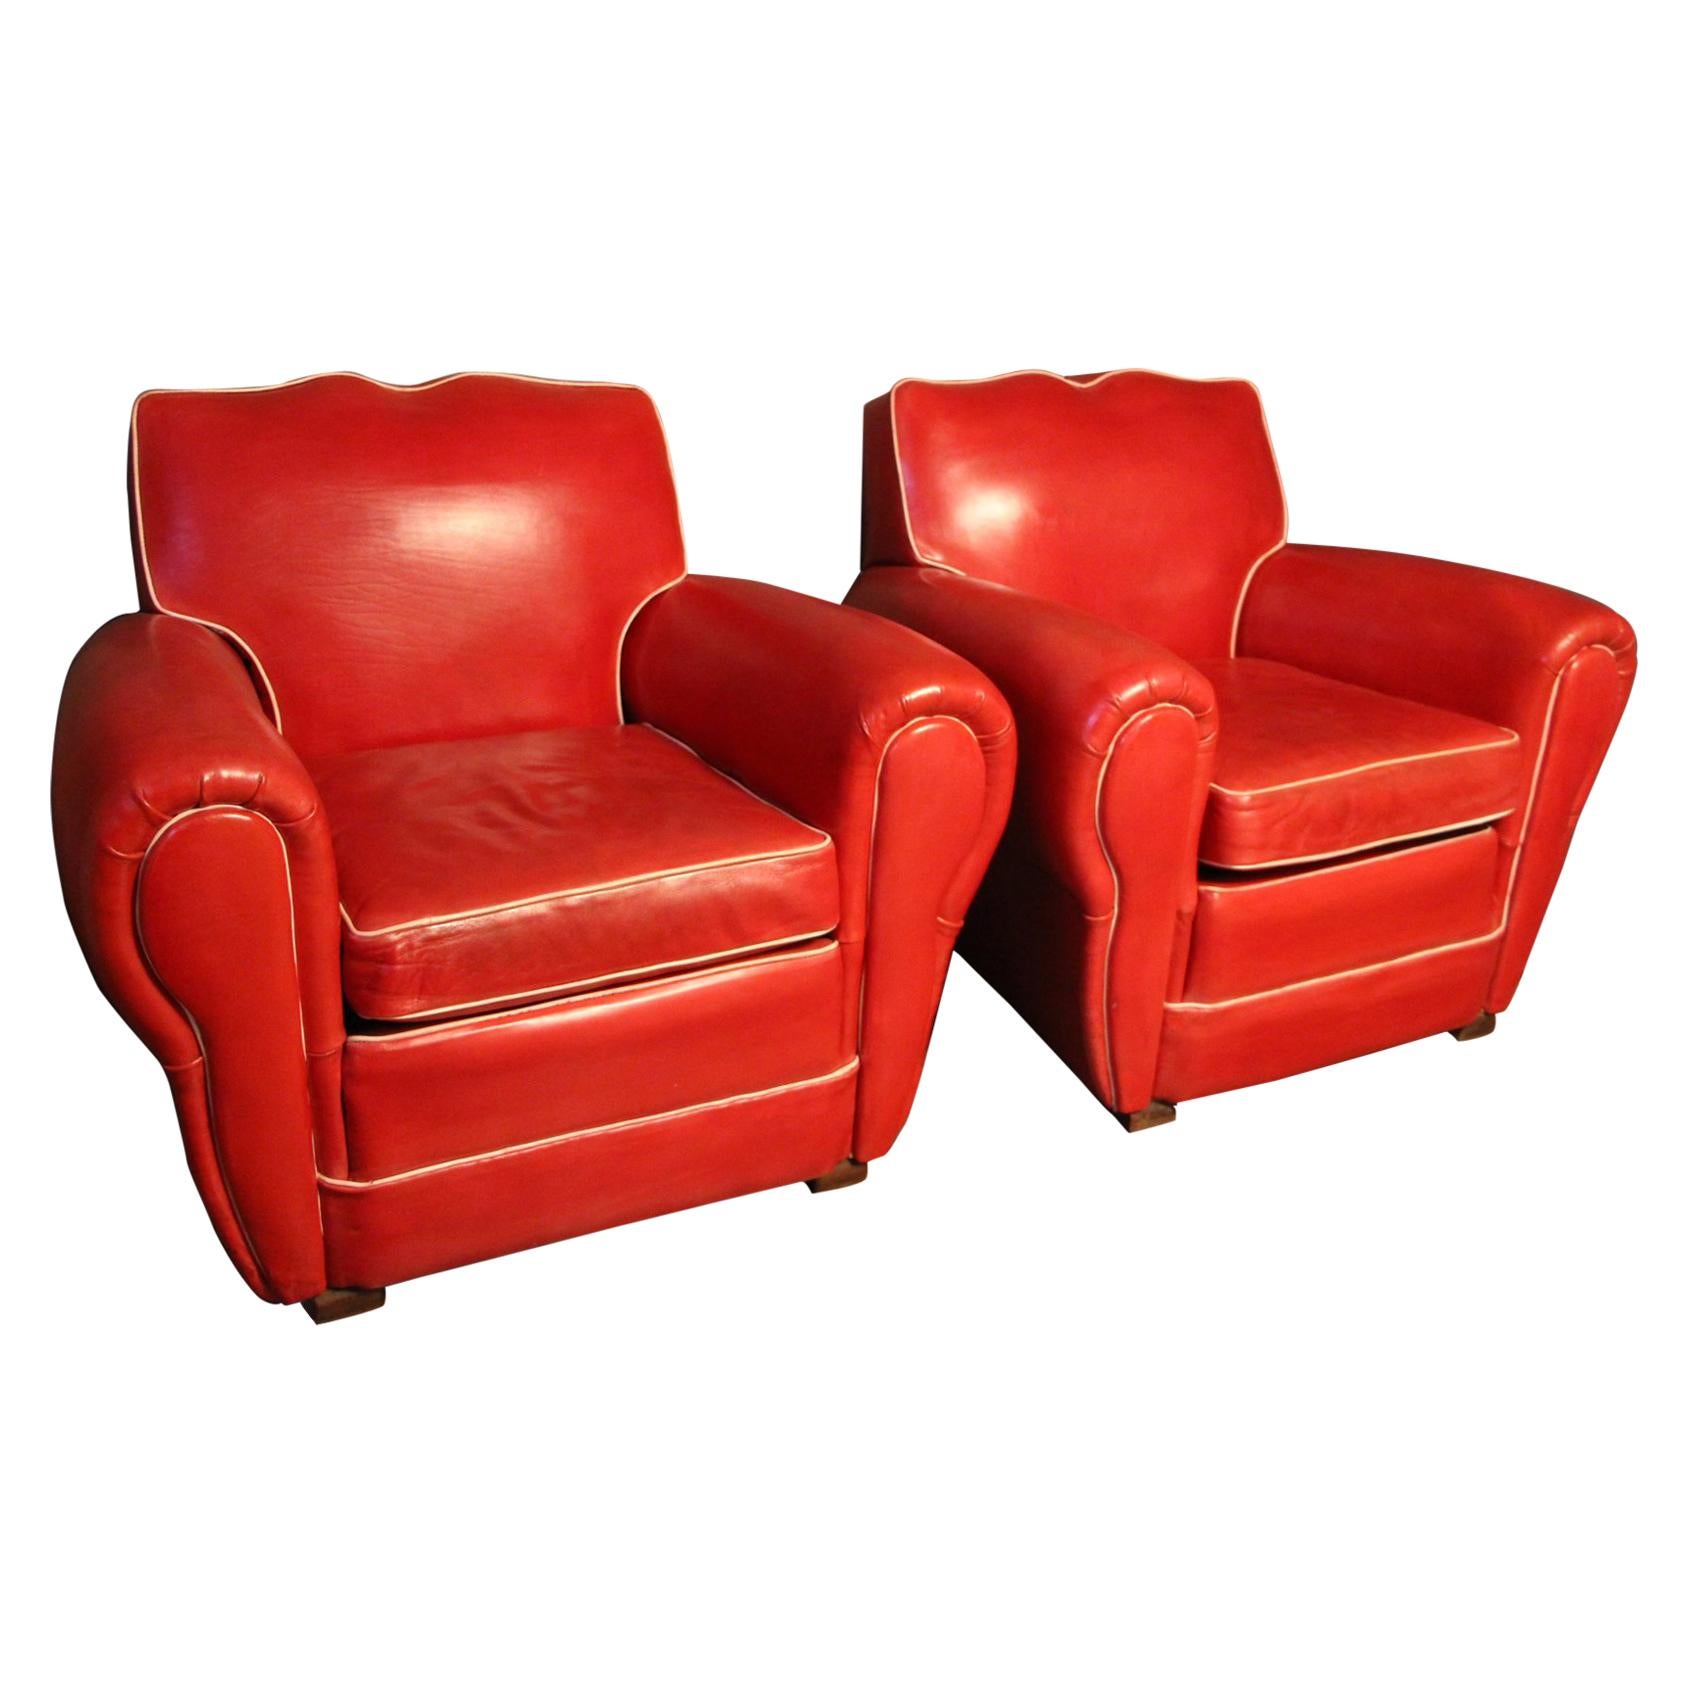 Pair of Art Deco French Mustache Back Club Chairs in Red Leather